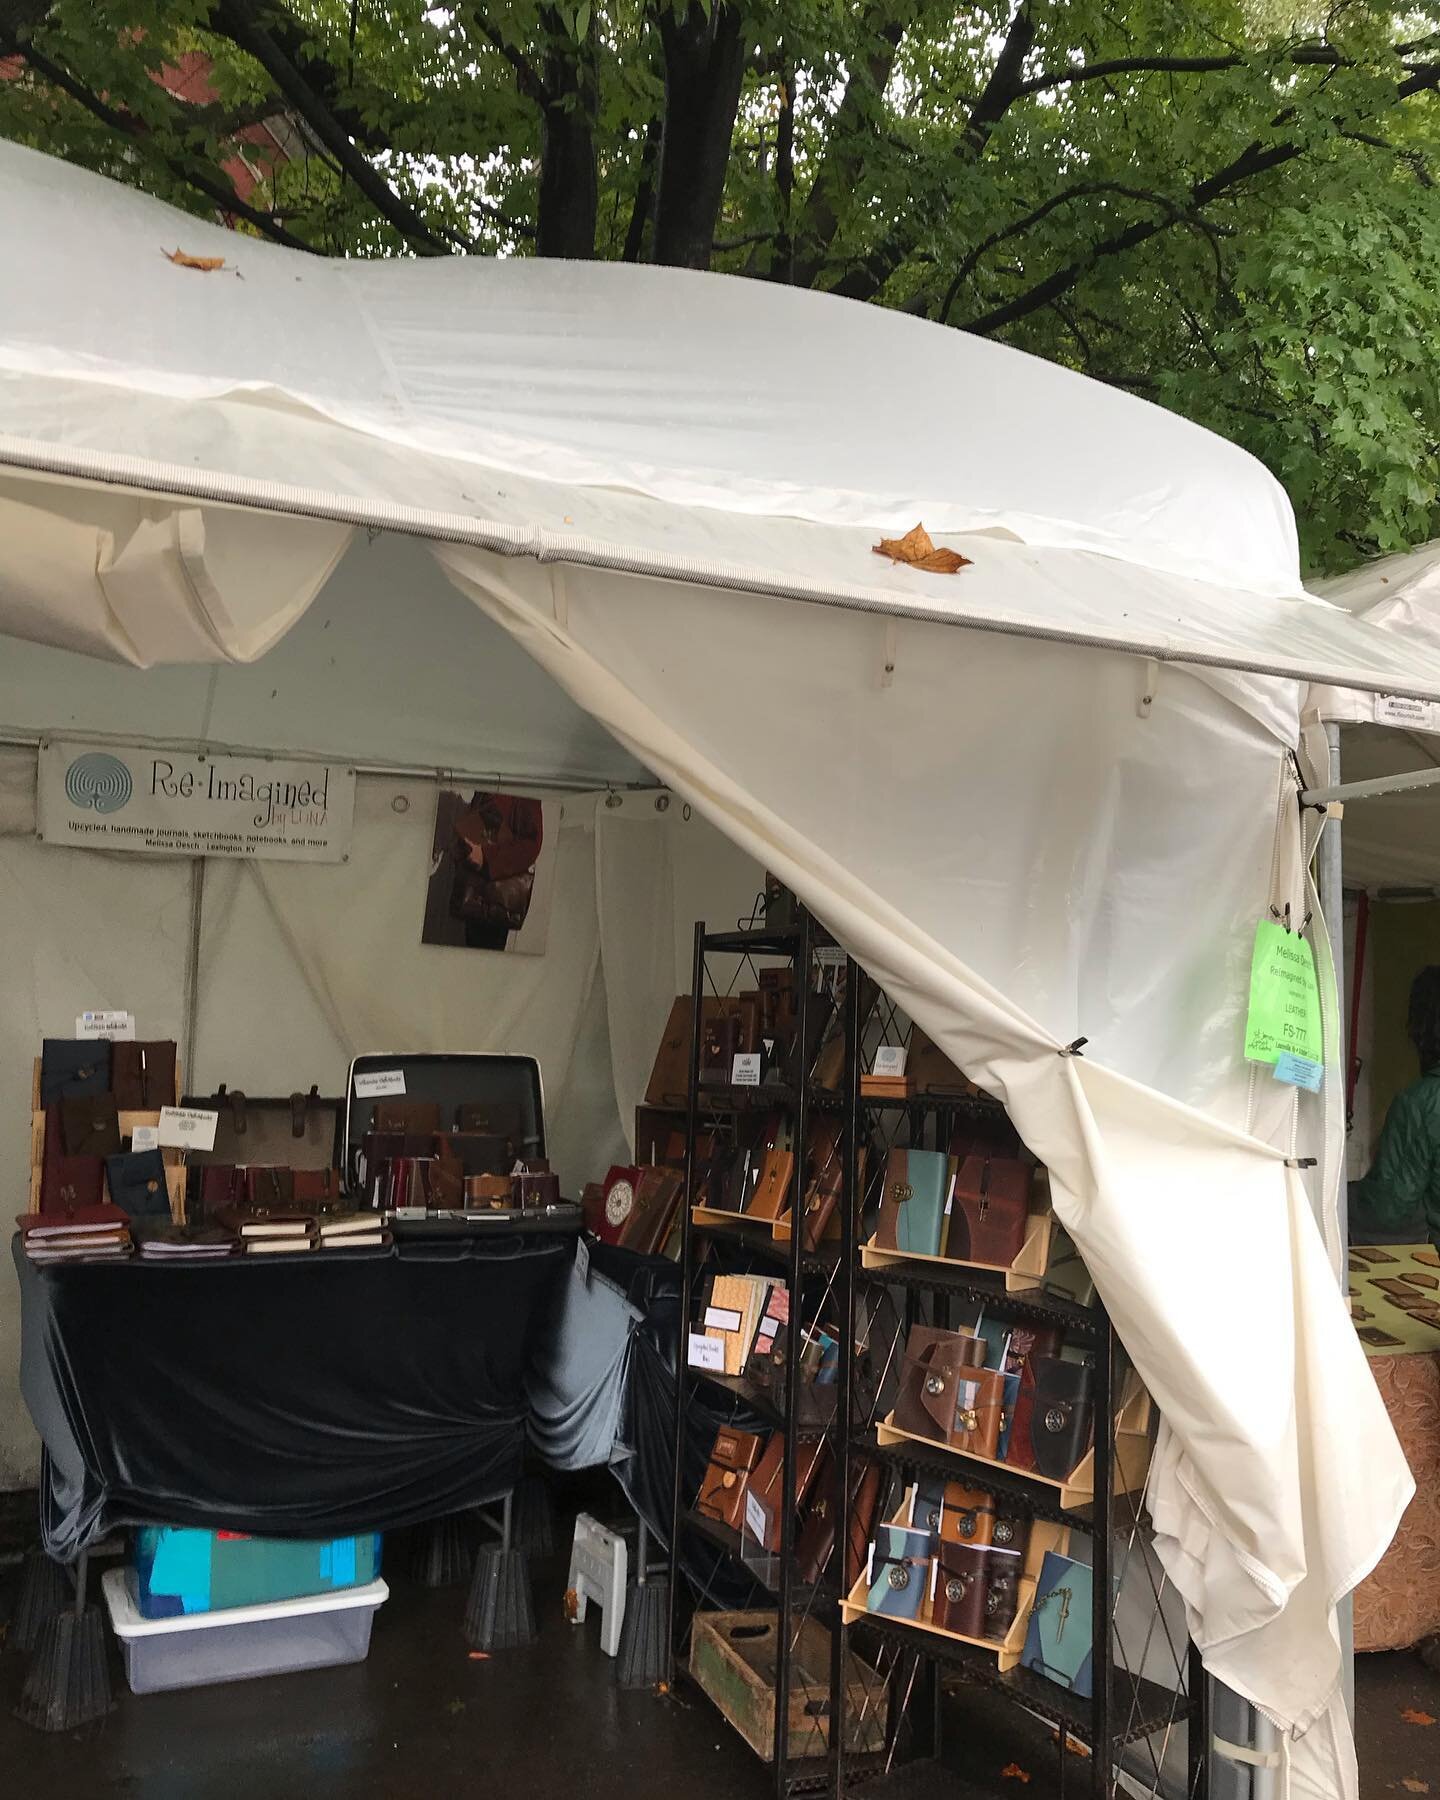 It&rsquo;s only drizzling now at the @st_james_art_show, and the river in my booth went away. Thankfully, nothing was damaged. We&rsquo;re out here until 5pm today if you were hoping to come by. You can avoid the usual crowds and still enjoy all the 